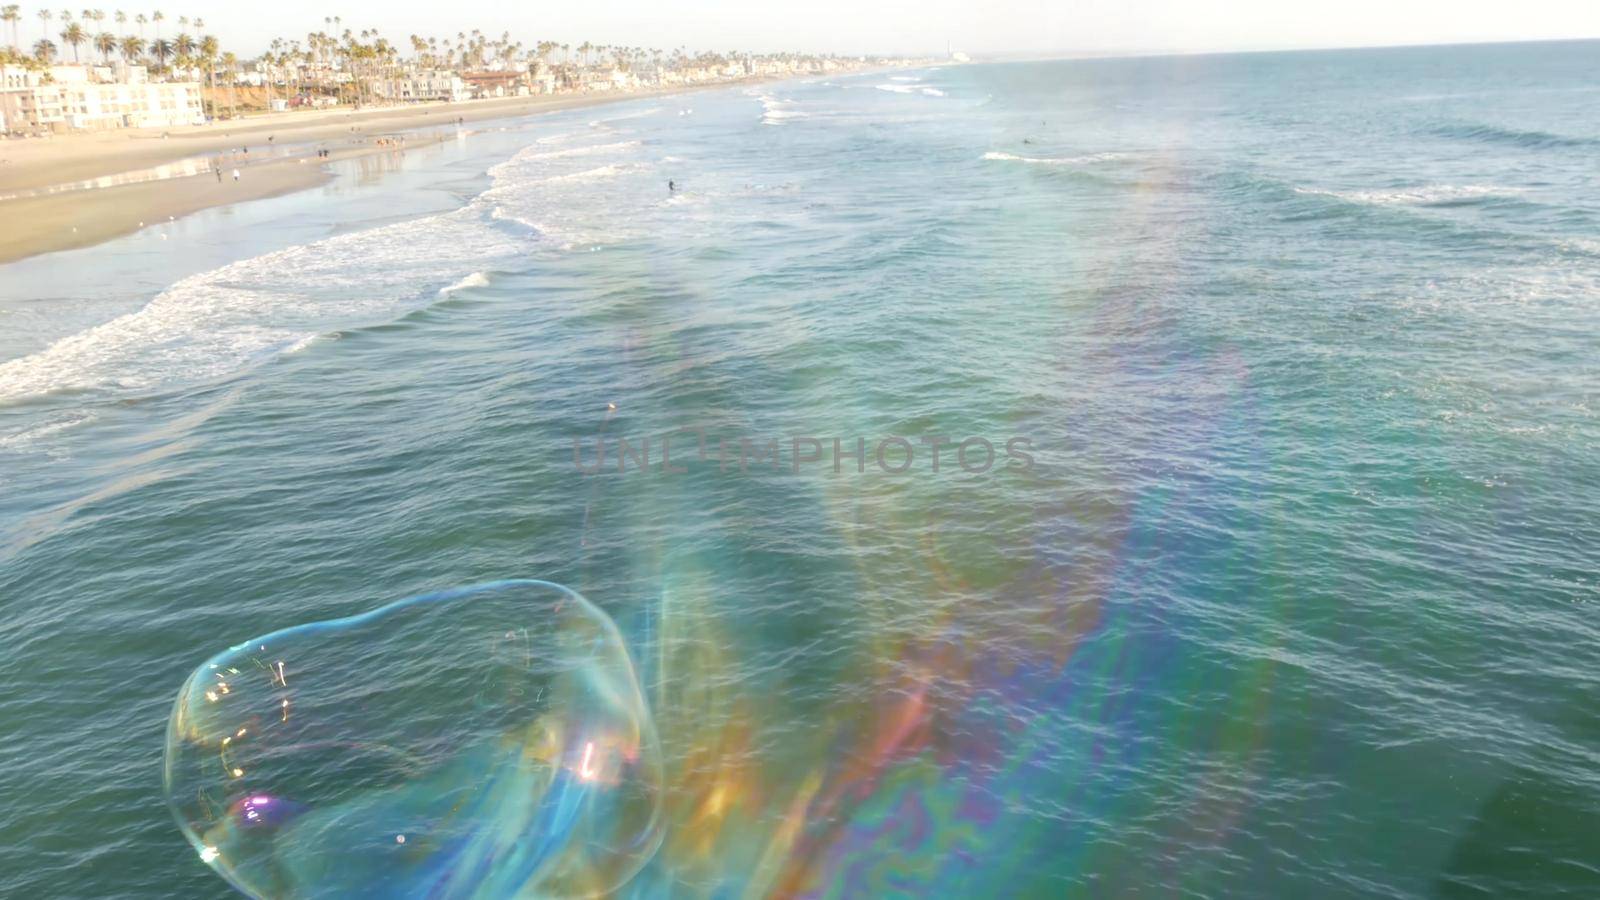 Blowing soap bubbles on ocean pier in California, blurred summertime background. Creative romantic metaphor, concept of dreaming happiness and magic. Abstract symbol of childhood, fantasy, freedom by DogoraSun